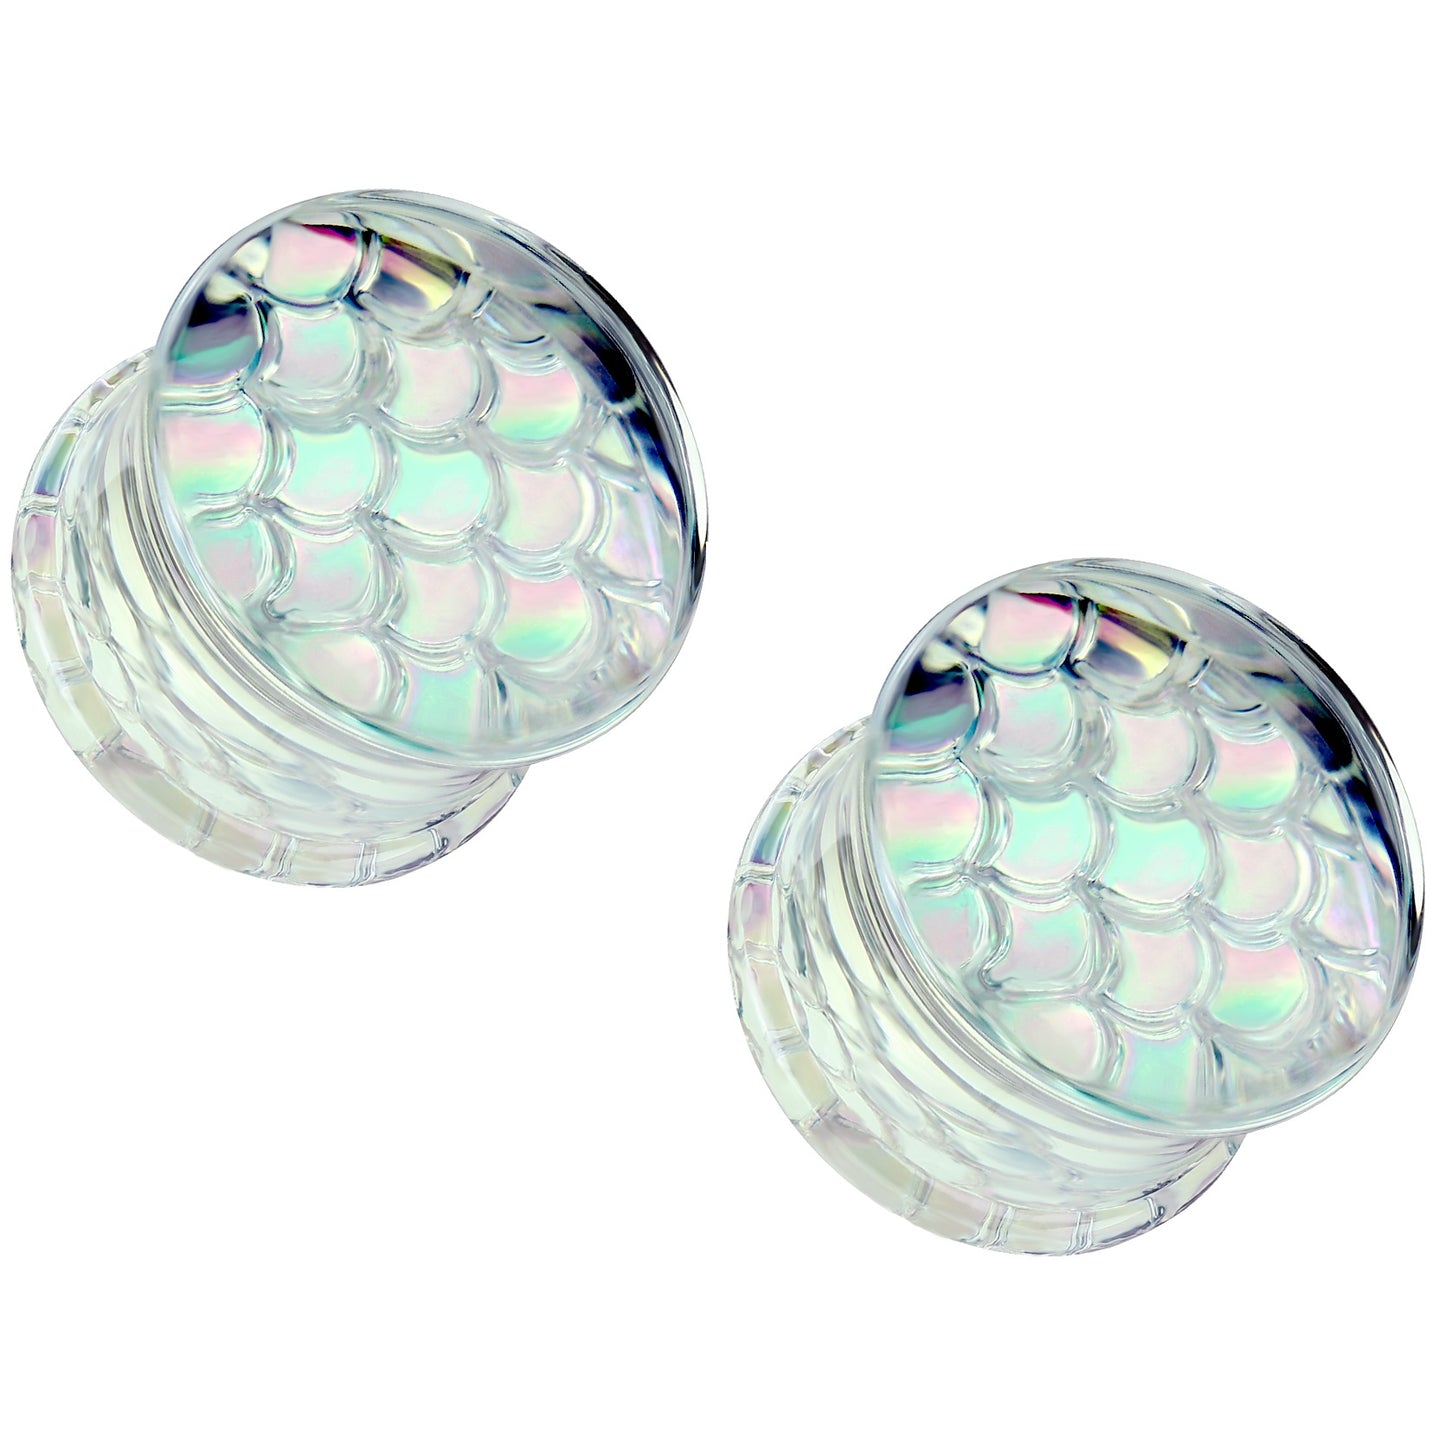 Pyrex Glass Iridescent Mermaid Scales Double Flared Plugs - Pair